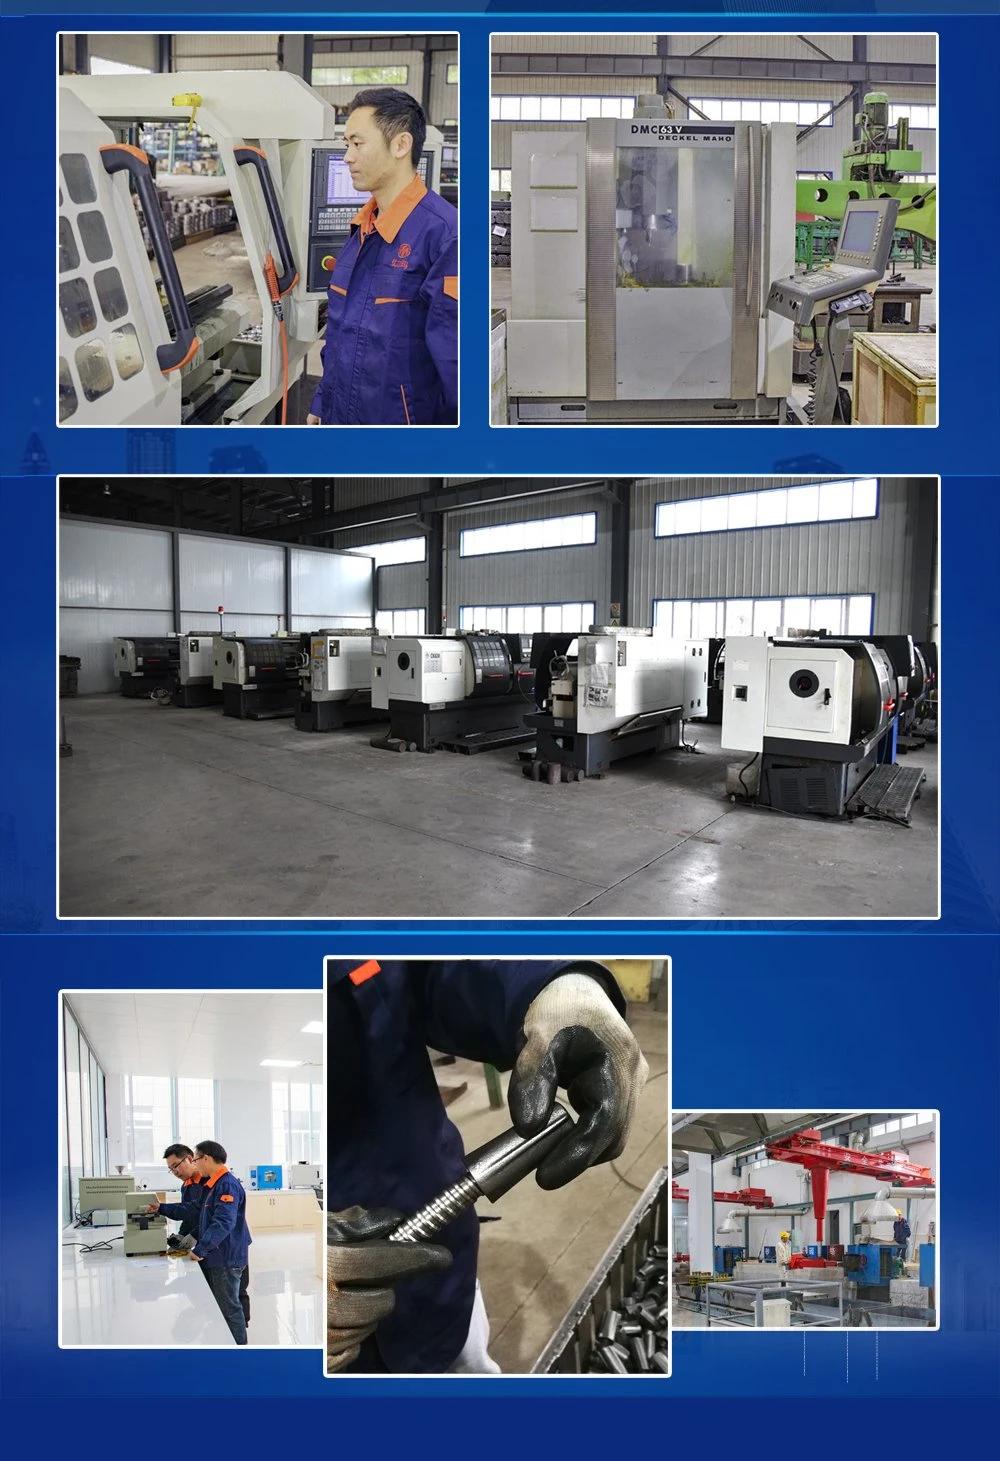 Casting, Forging, Pressing, Equipment, Mining, Nuts, Accessories, Component, Construction, Auto Part, Hot Galvanized, Power Fitting